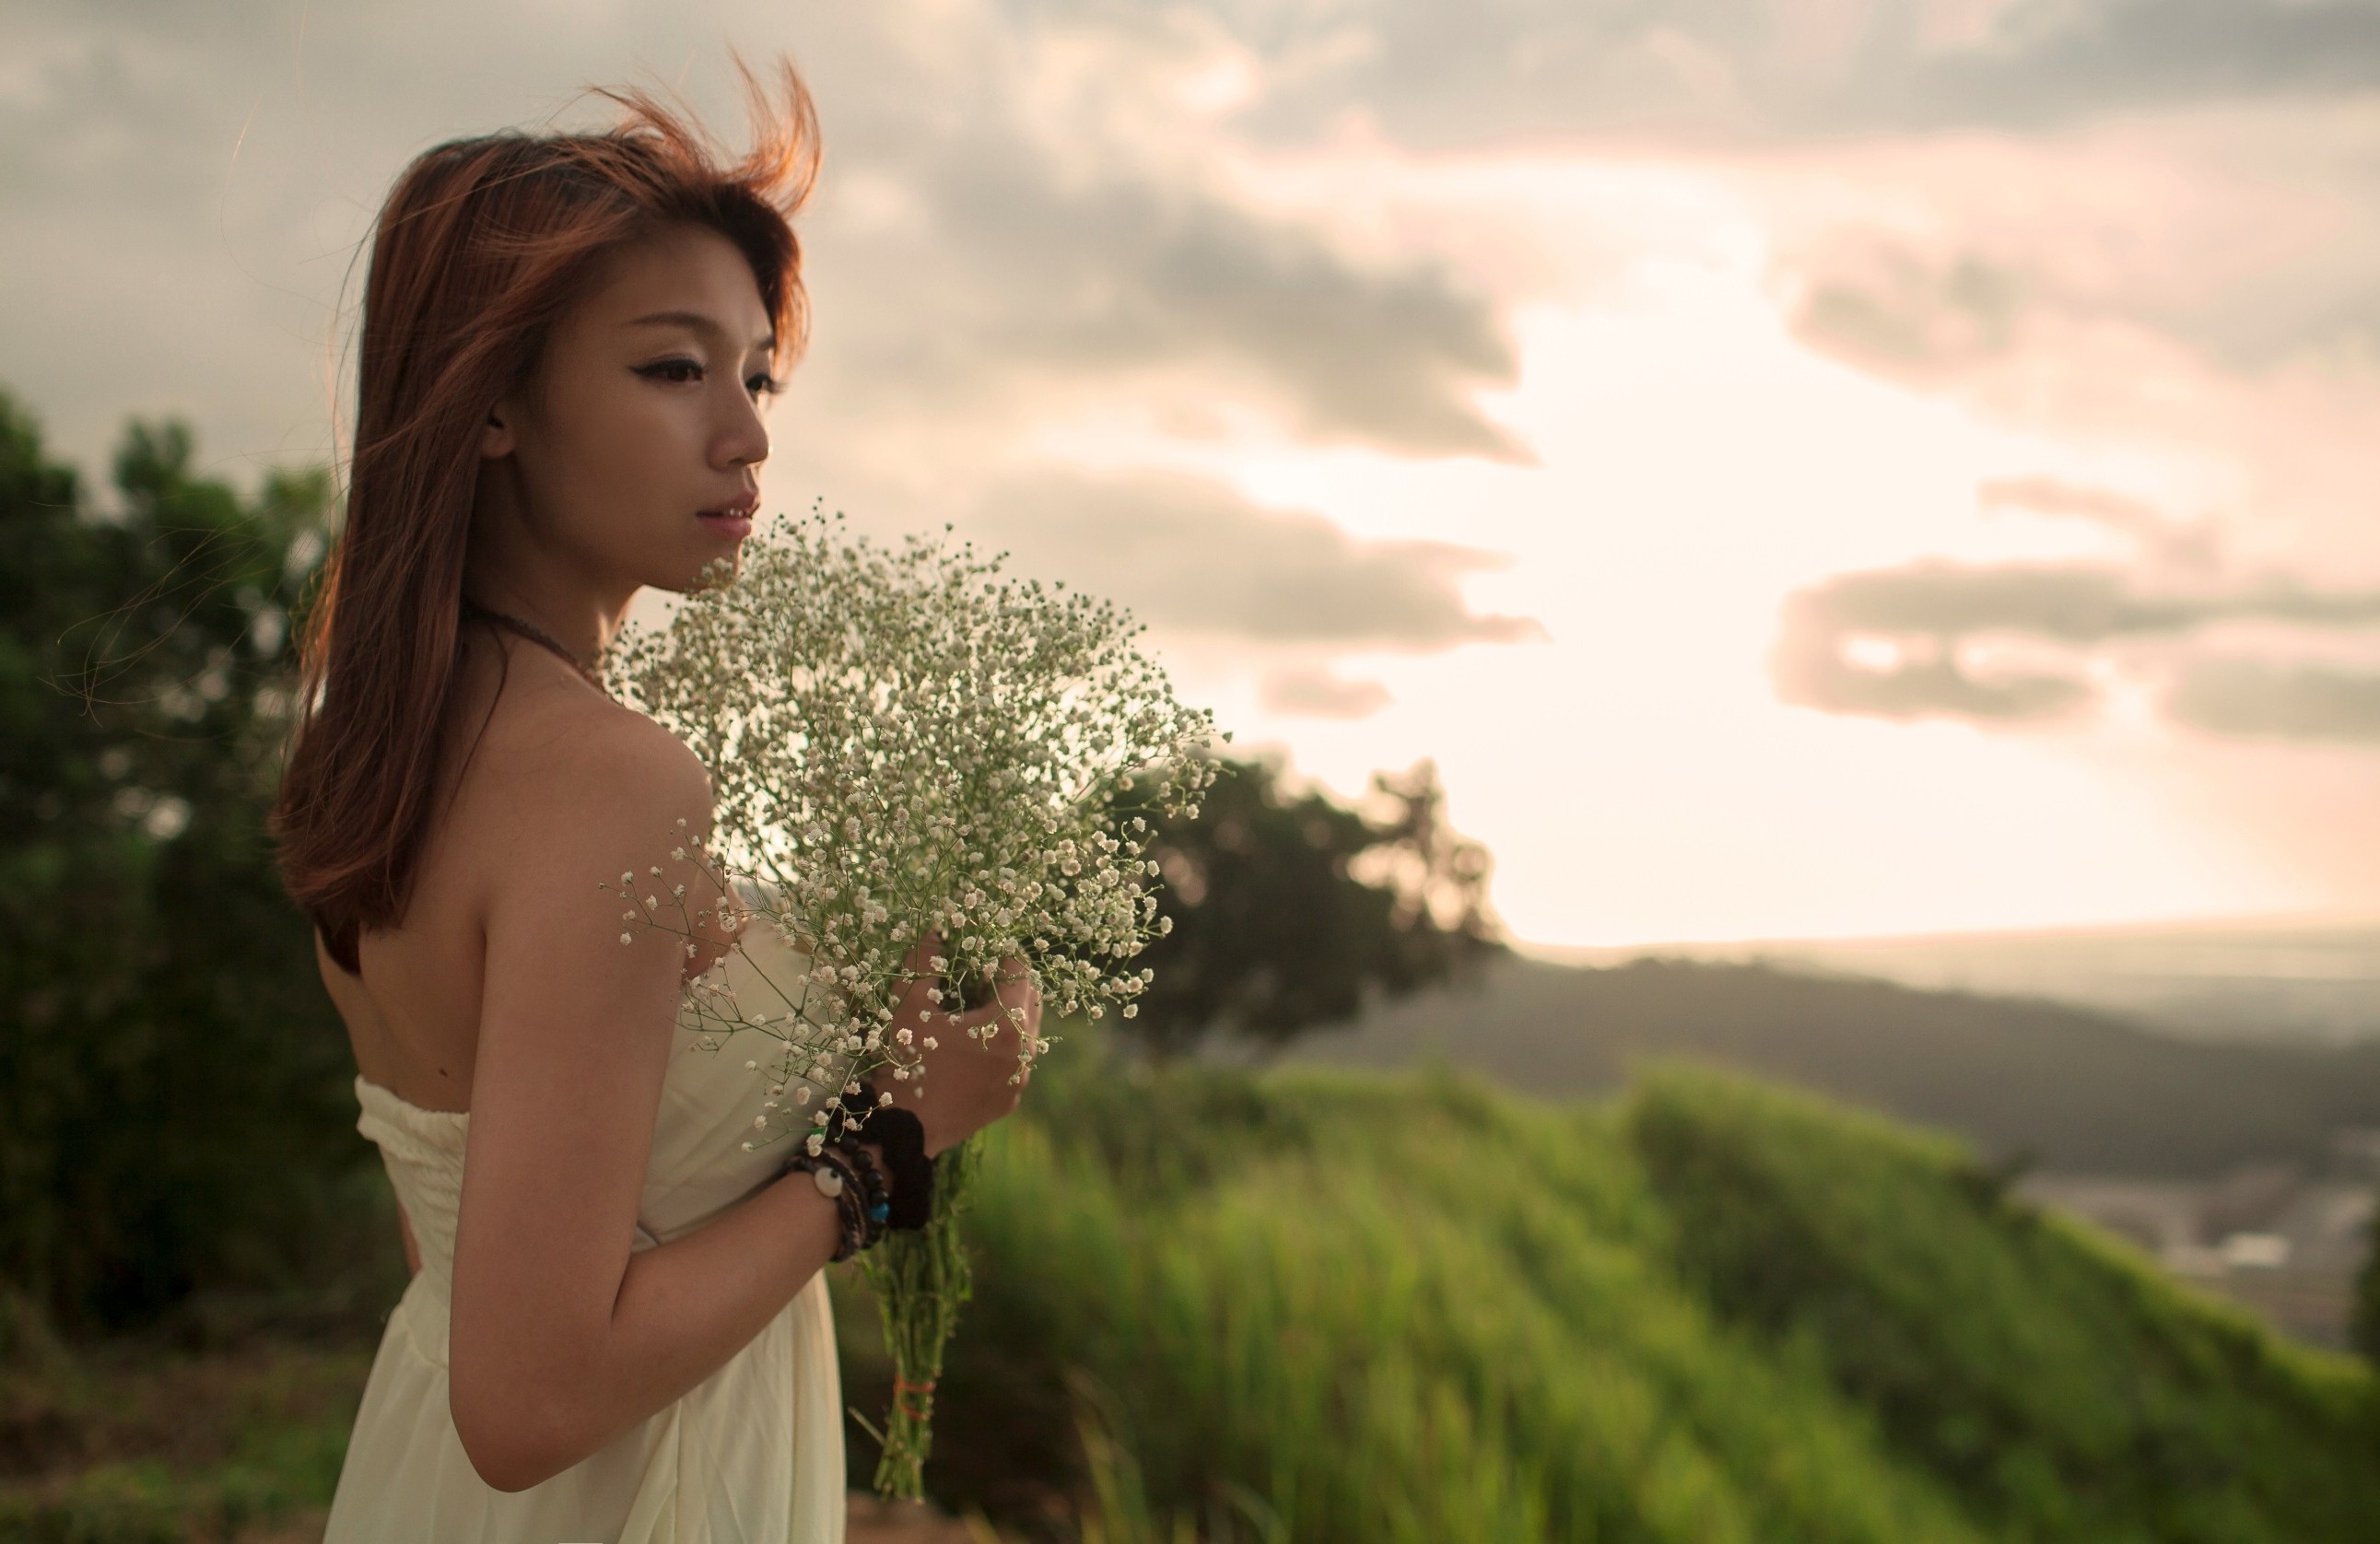 Portrait Of Blonde Girl In White Dress In Nature Stock 